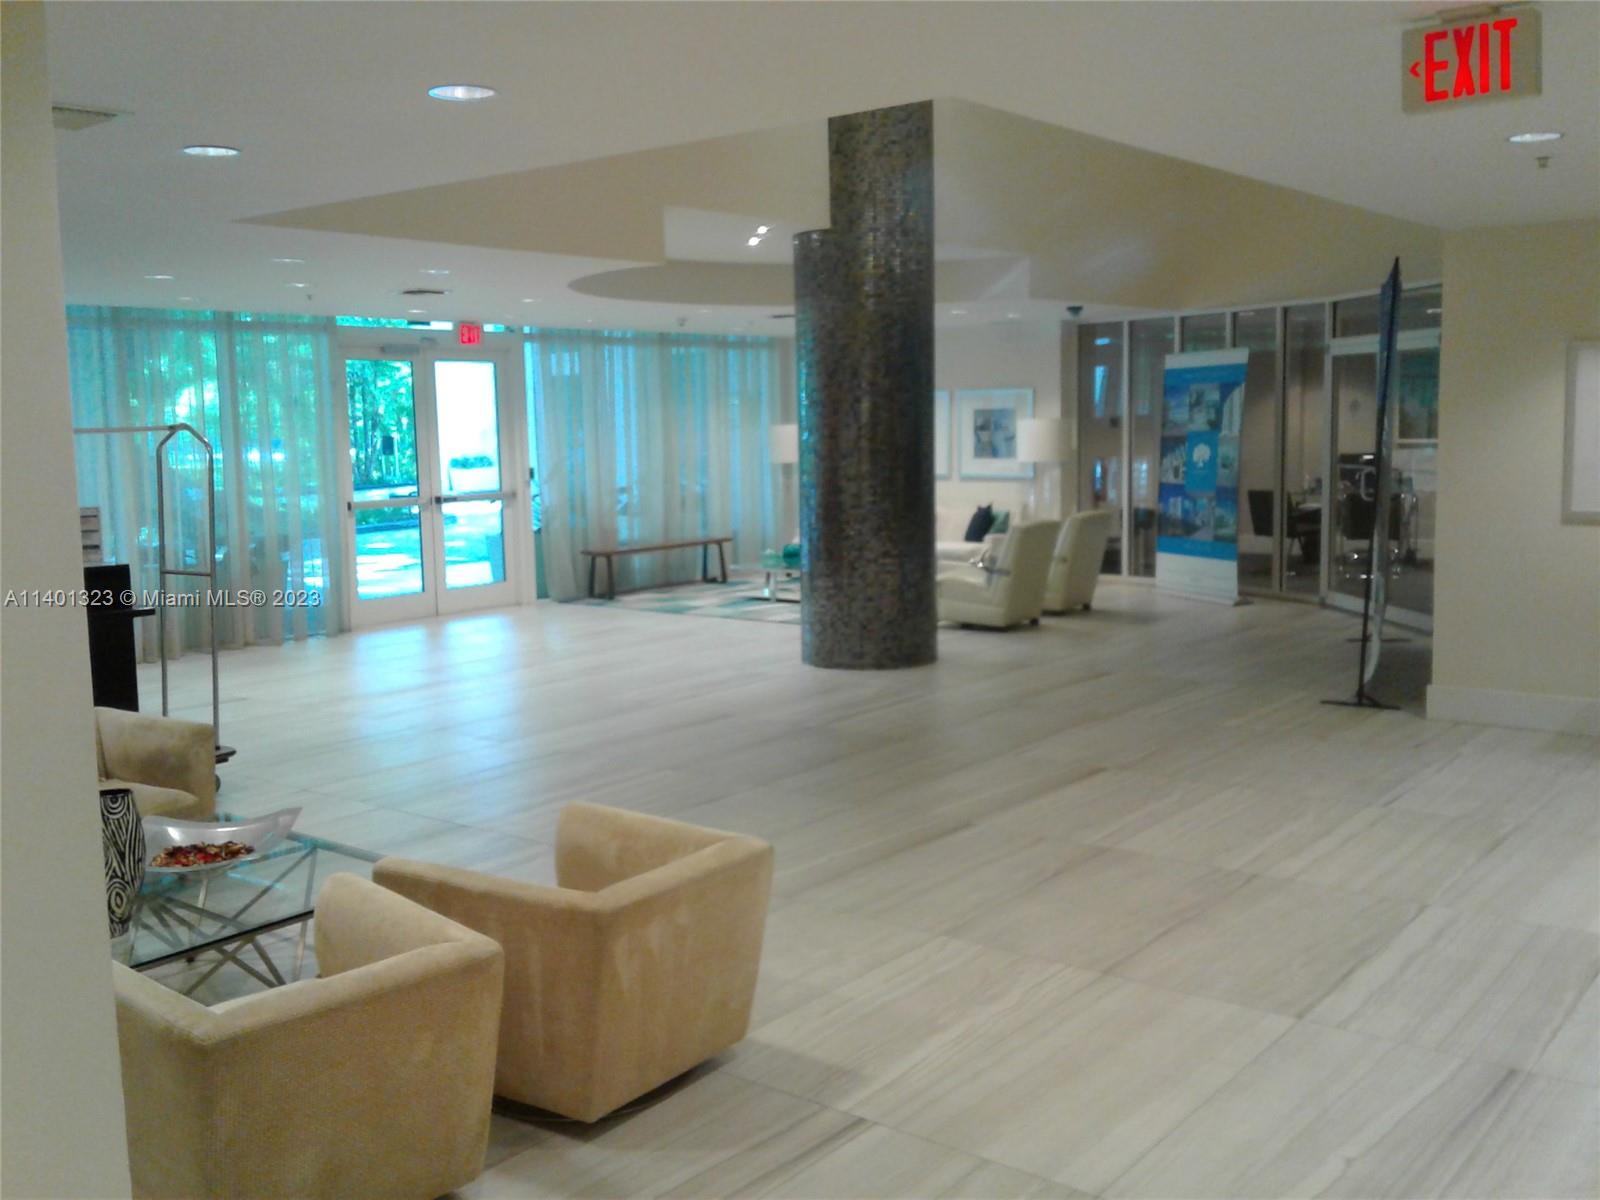 a lobby with furniture and window